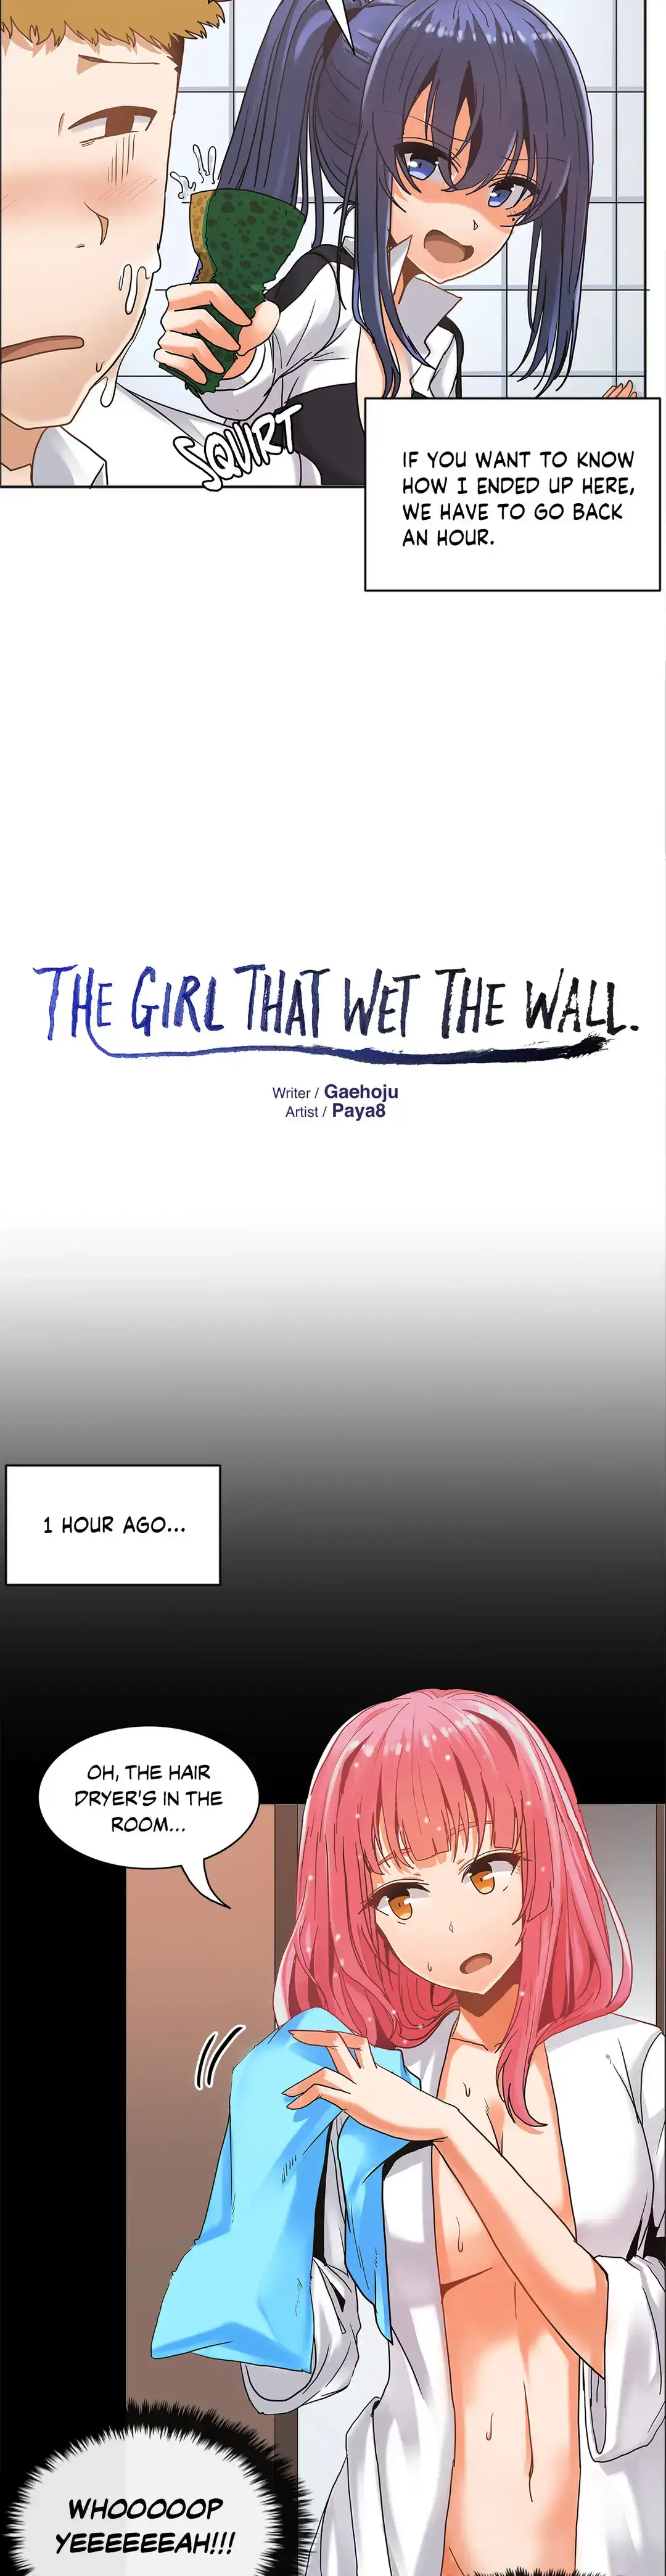 The Girl That Wet the Wall image